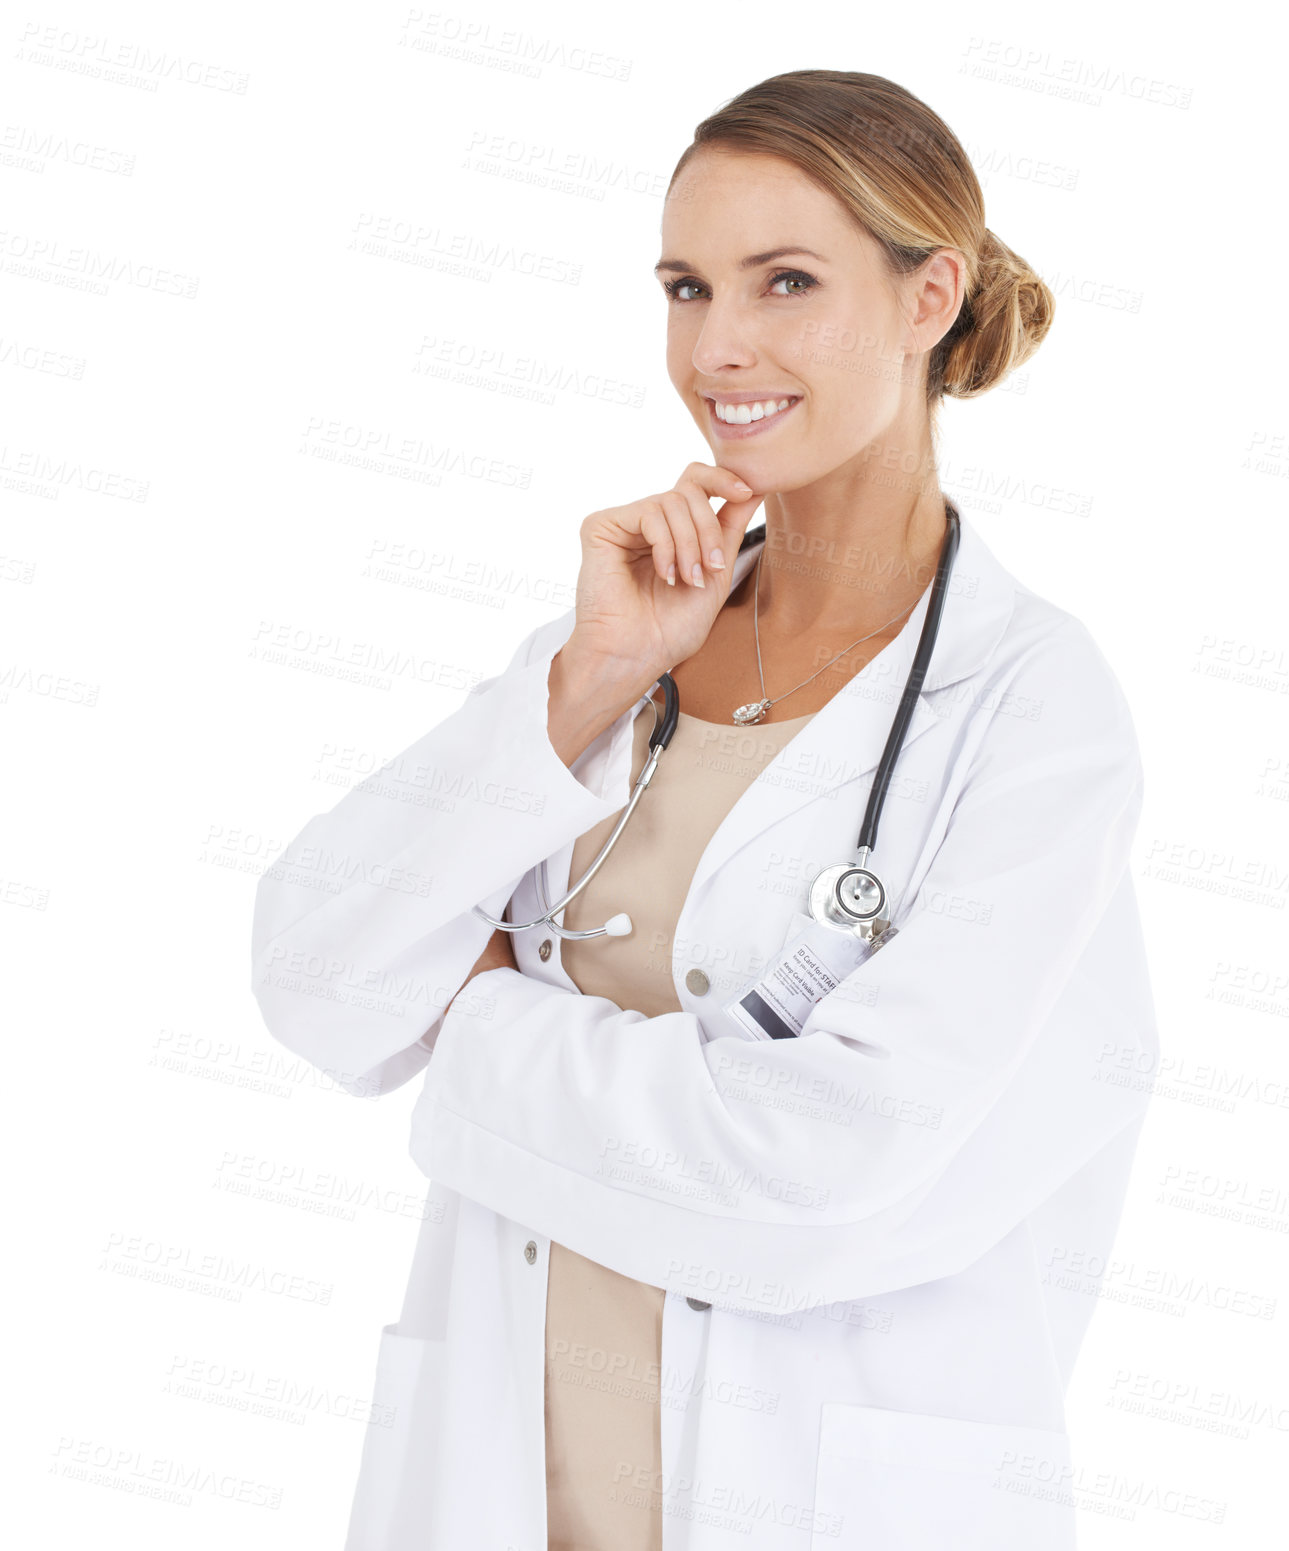 Buy stock photo Doctor, happy woman or portrait in studio with confidence or pride in medical career as cardiologist. Service, coat or proud medicine consultant with smile or healthcare isolated on white background